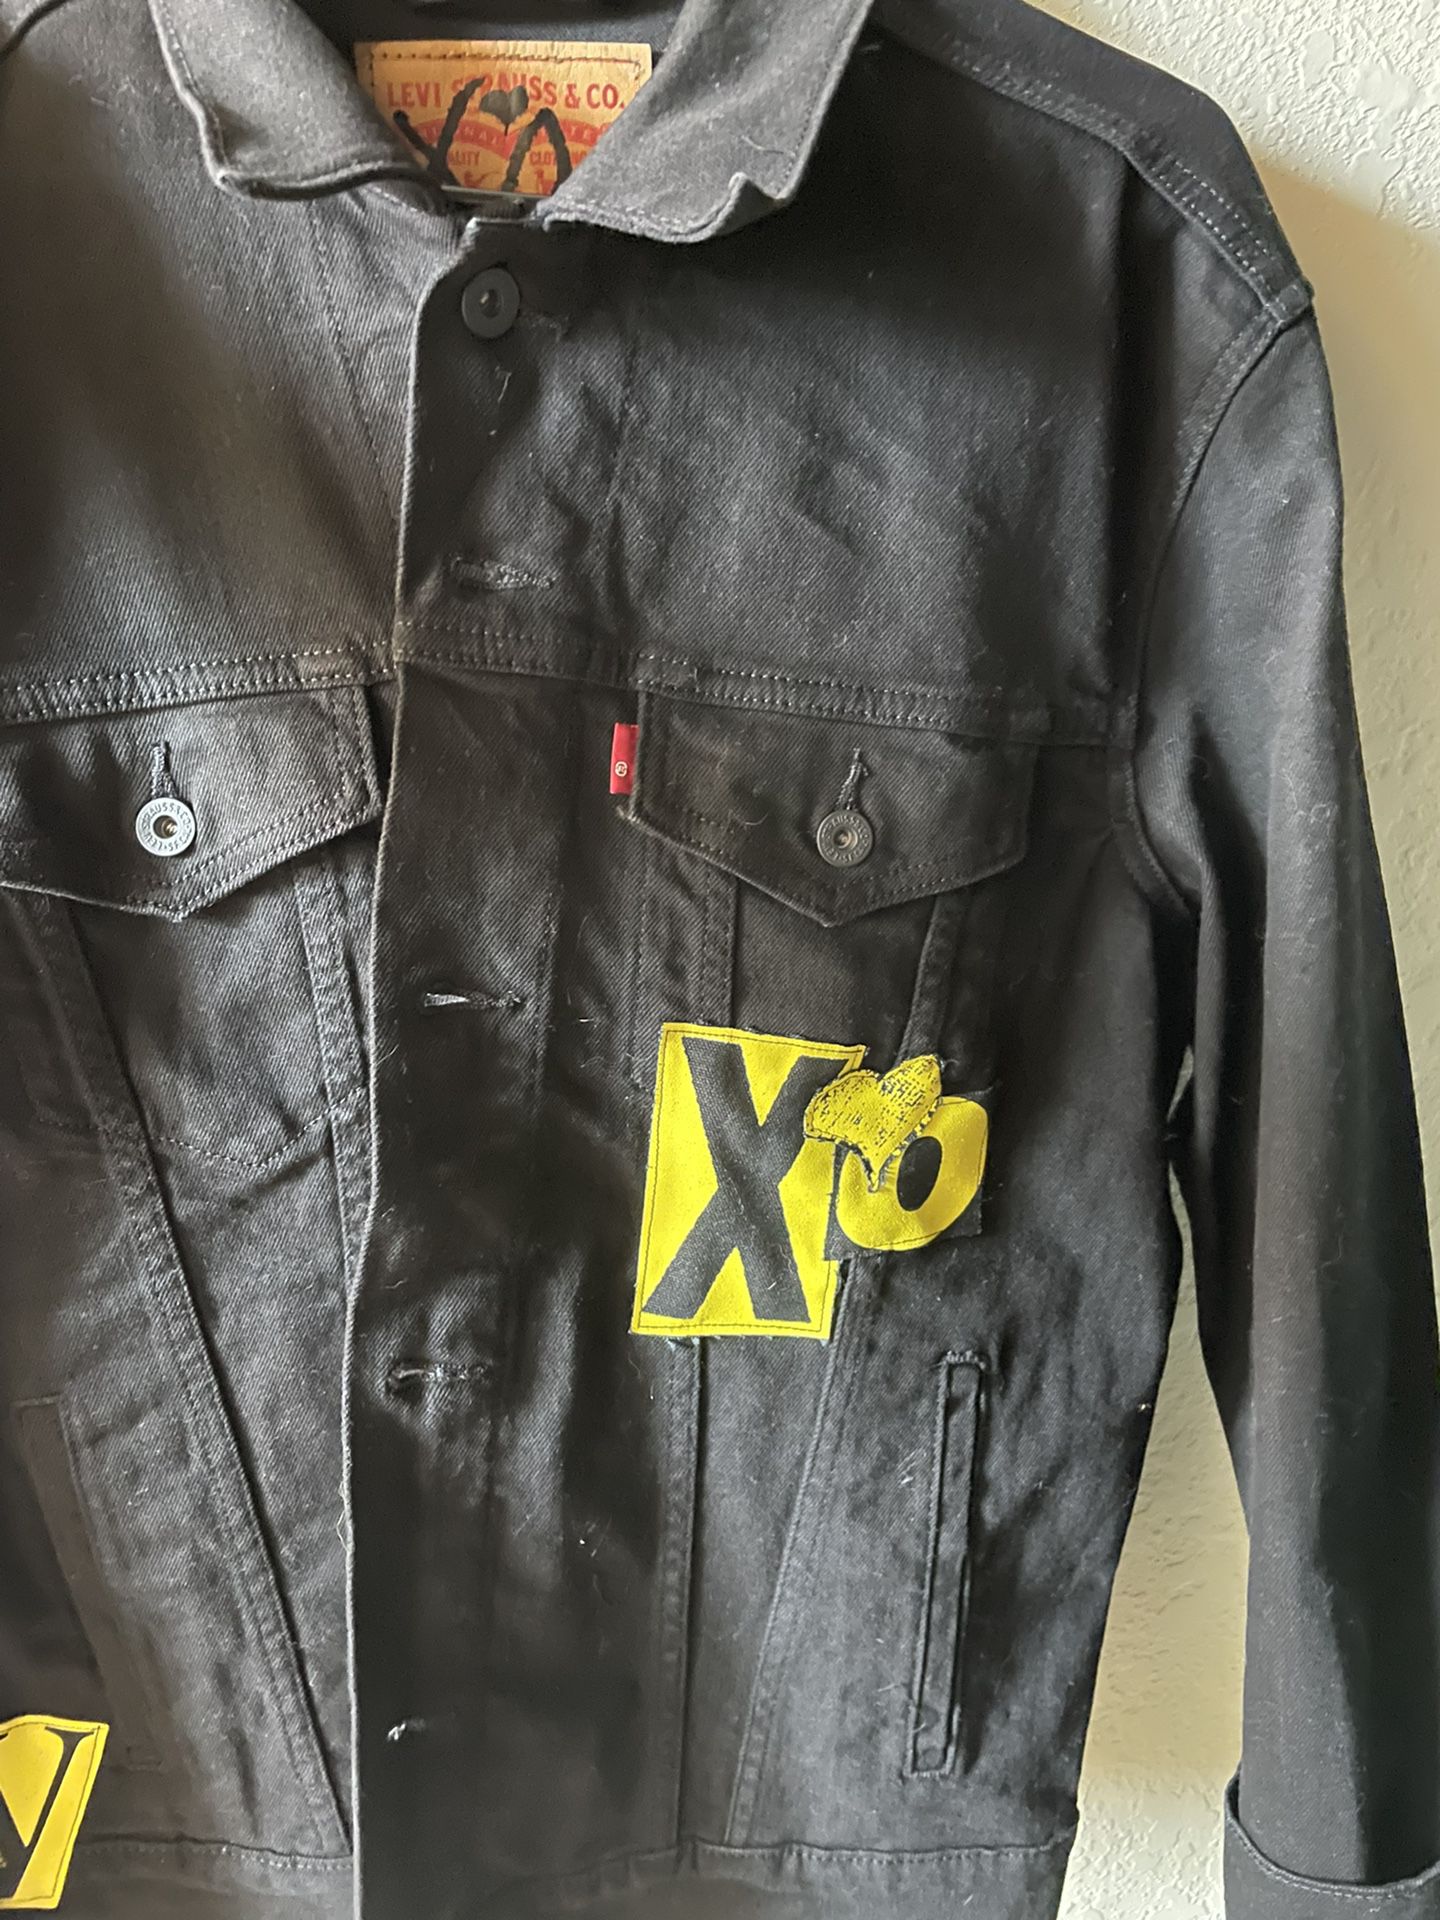 THE WEEKND XO LEVIS DENIM JACKET ( Beauty Behind The Madness ) SIZE LARGE 